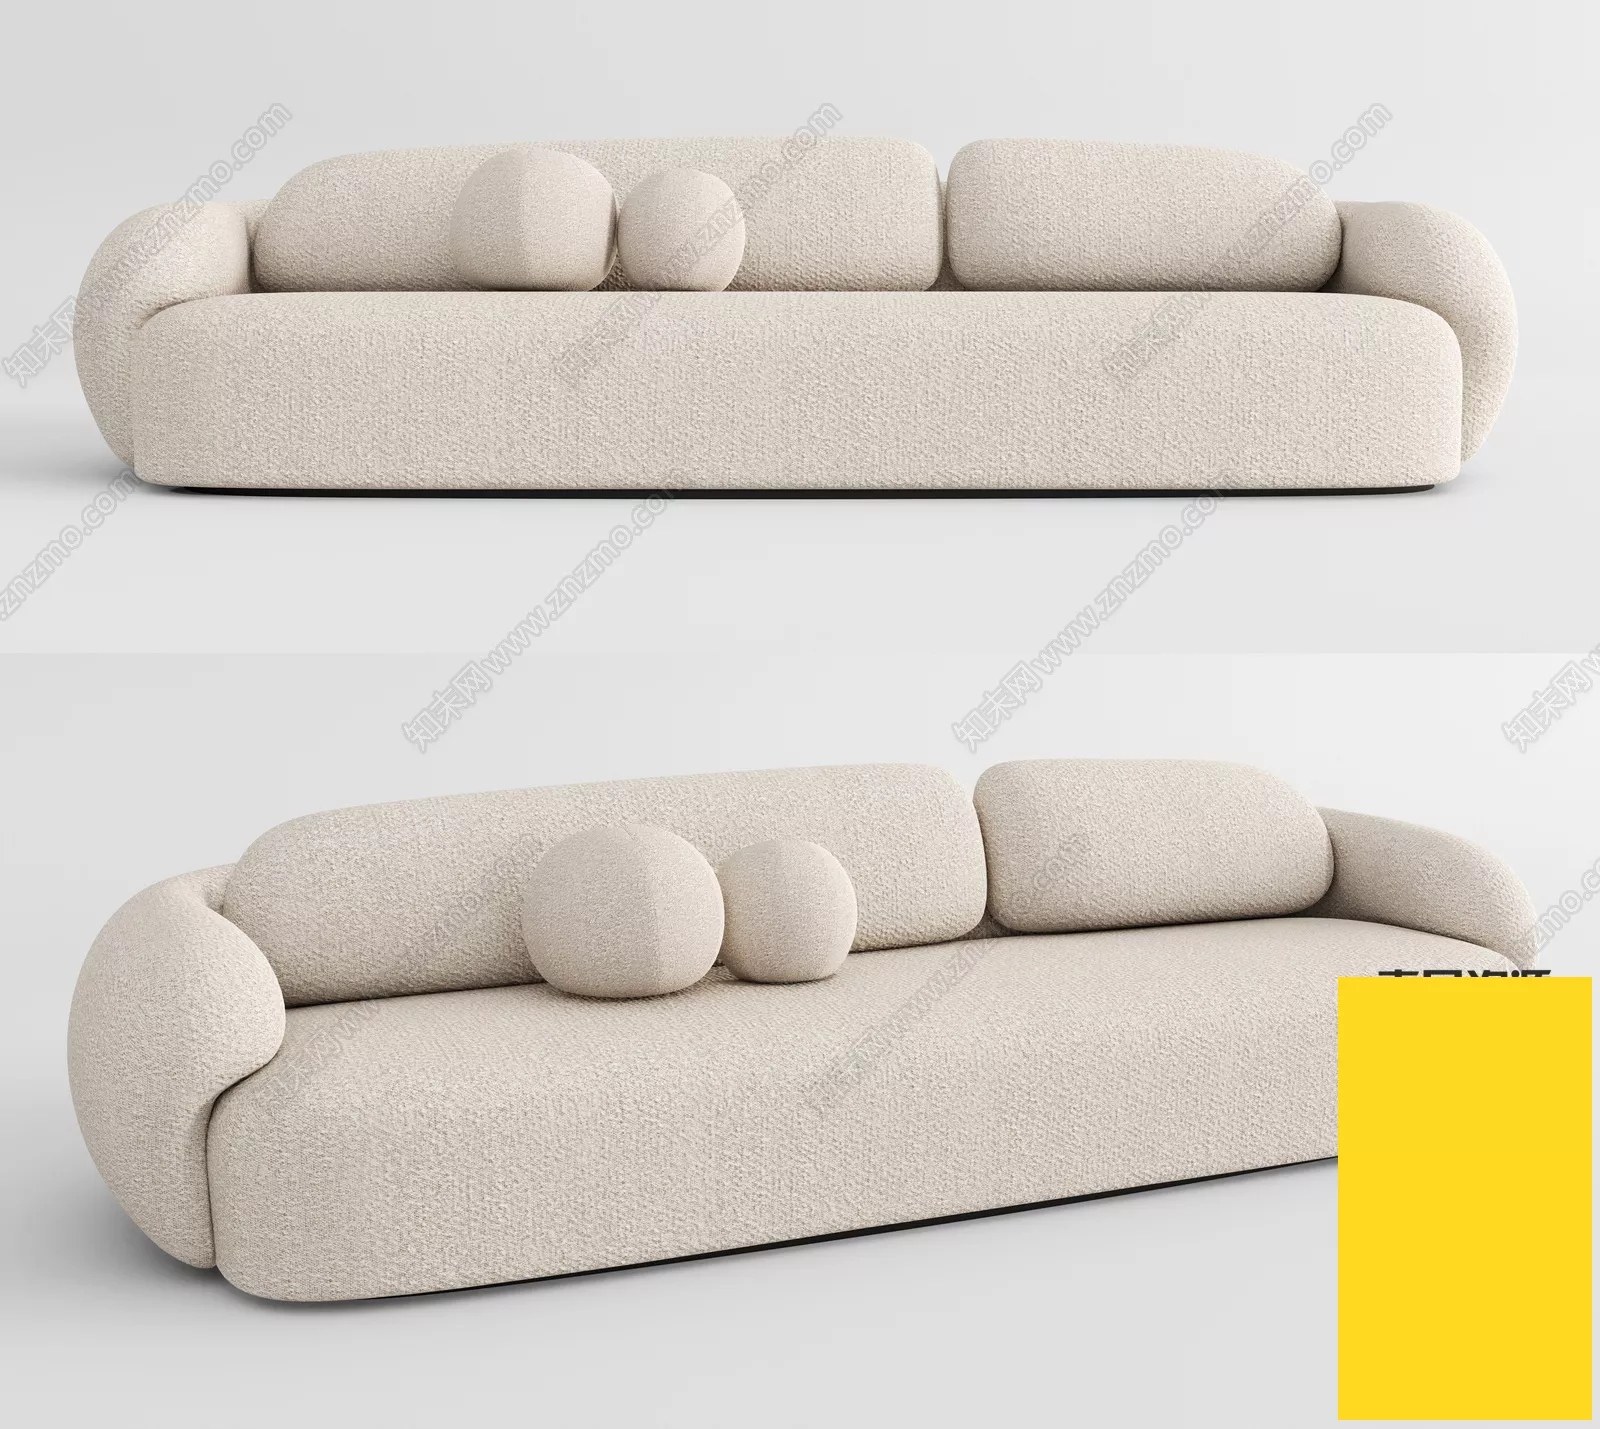 MODERN SOFA - SKETCHUP 3D MODEL - VRAY OR ENSCAPE - ID13159